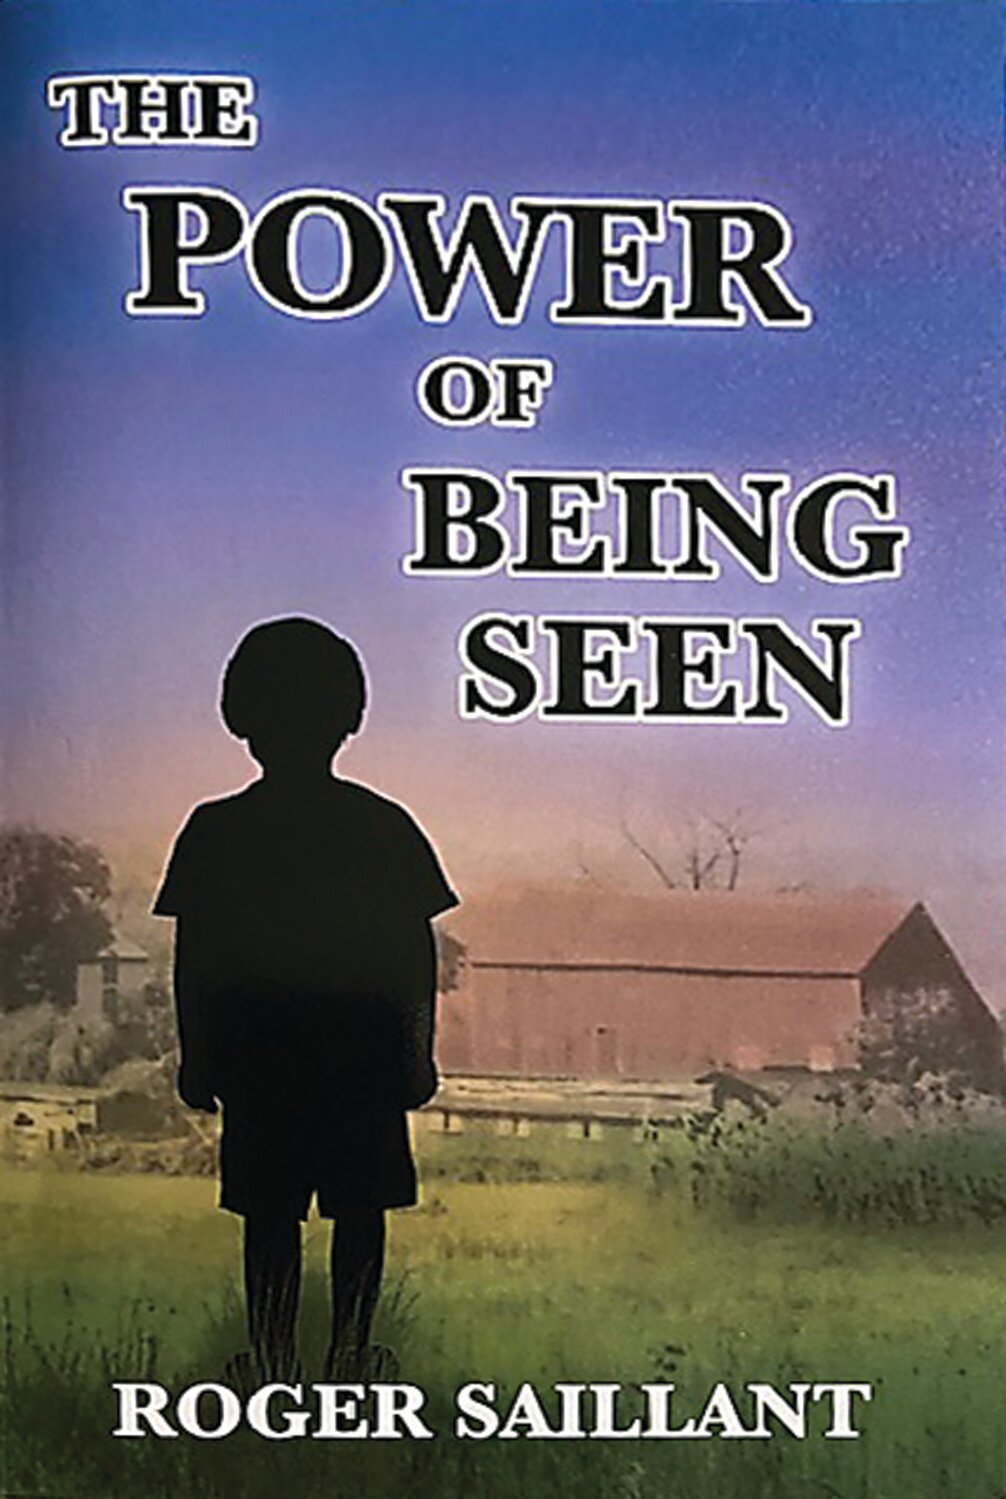 The cover of “The Power of Being Seen,” a memoir by Roger Saillant, who grew up as a foster child on a farm in New Britain Township.